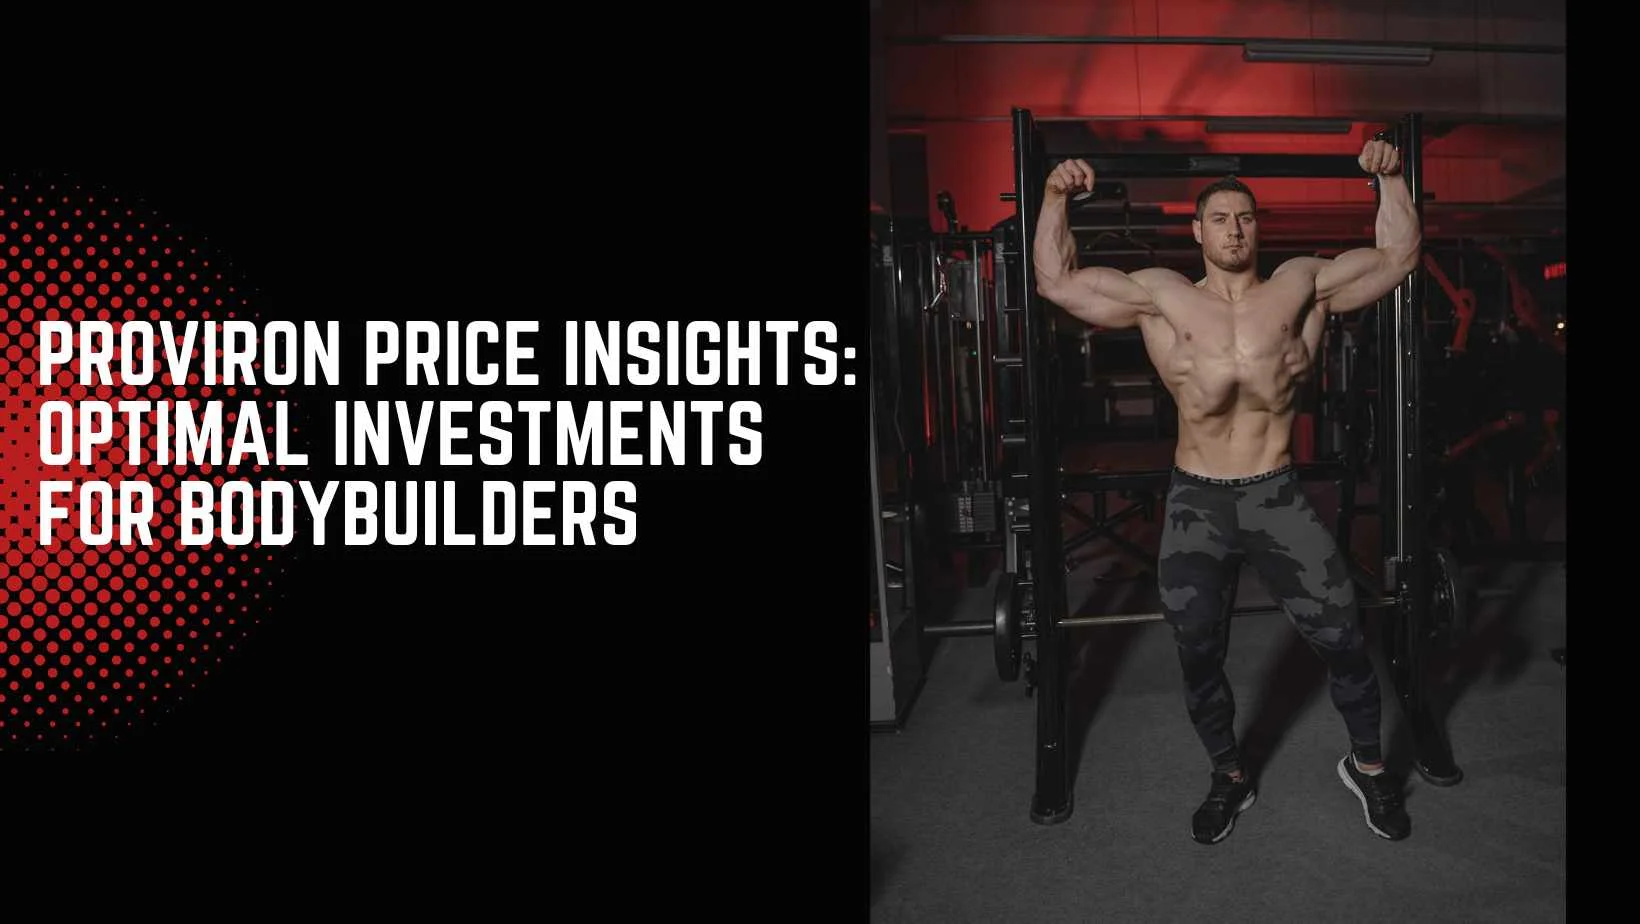 Proviron Price Insights: Optimal Investments for Bodybuilders